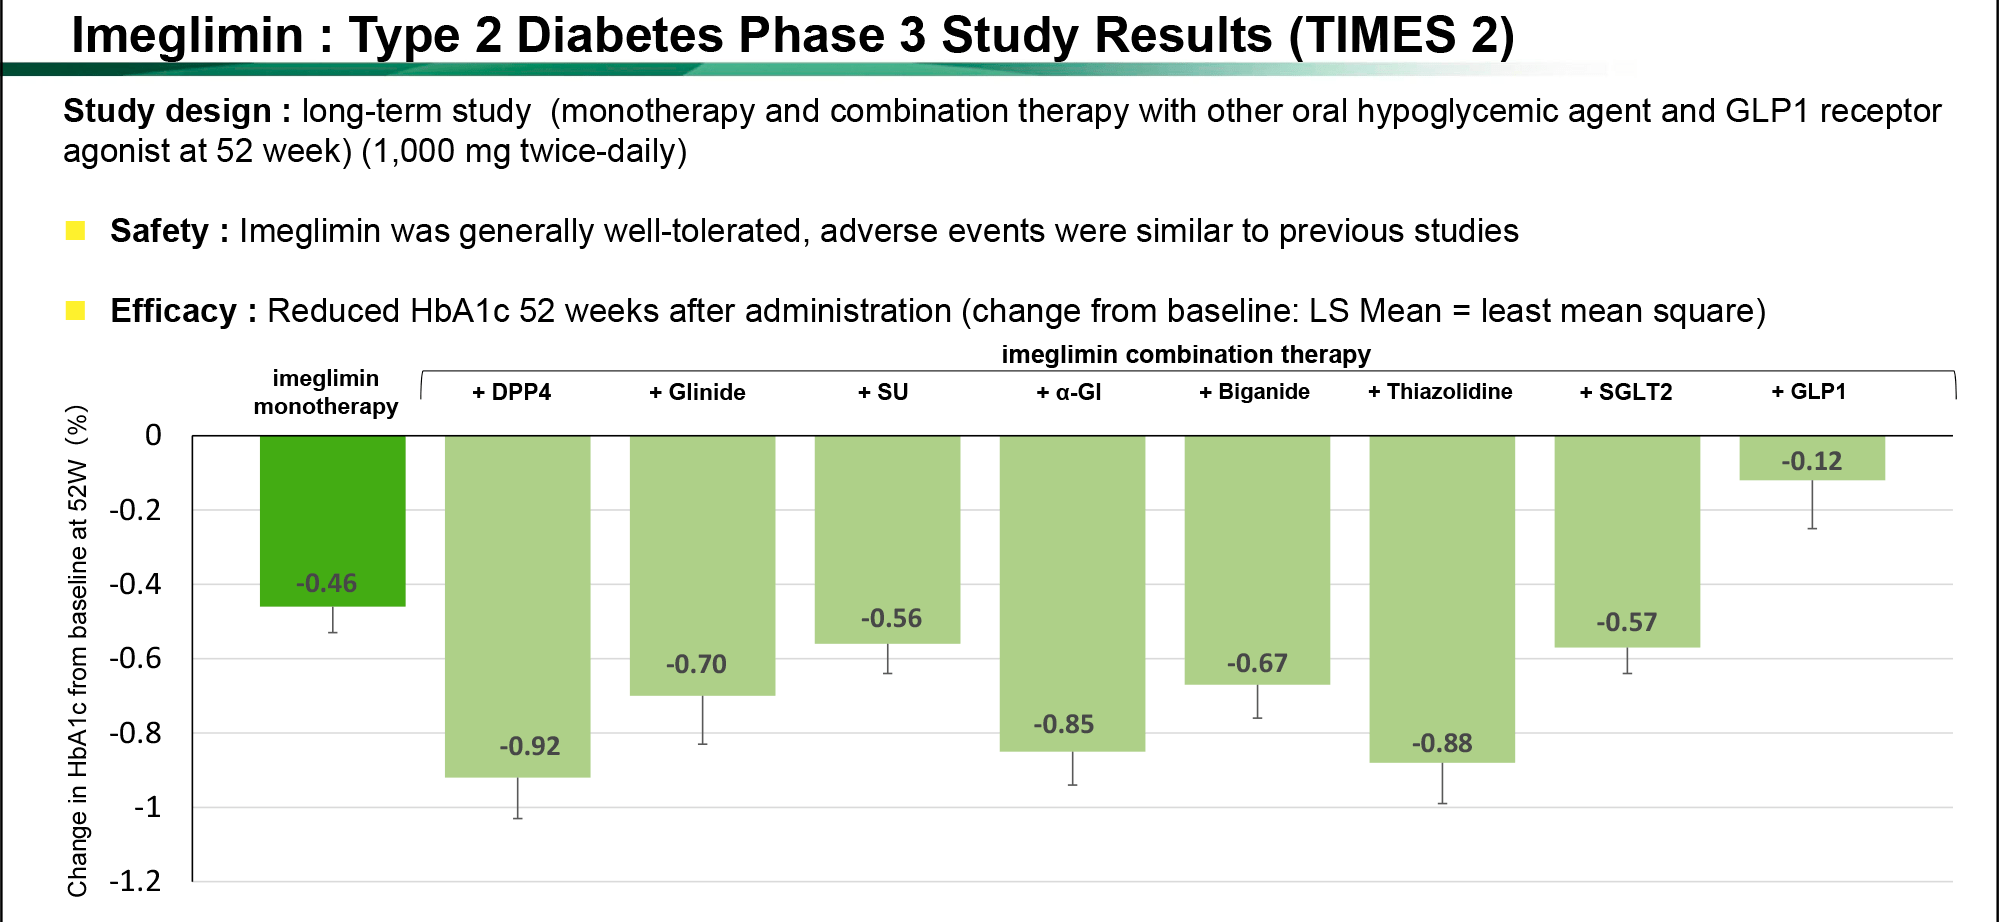 imeglimin times 2 results - Twymeeg: Completely New Drug for Treatment of Type 2 Diabetes Mellitus